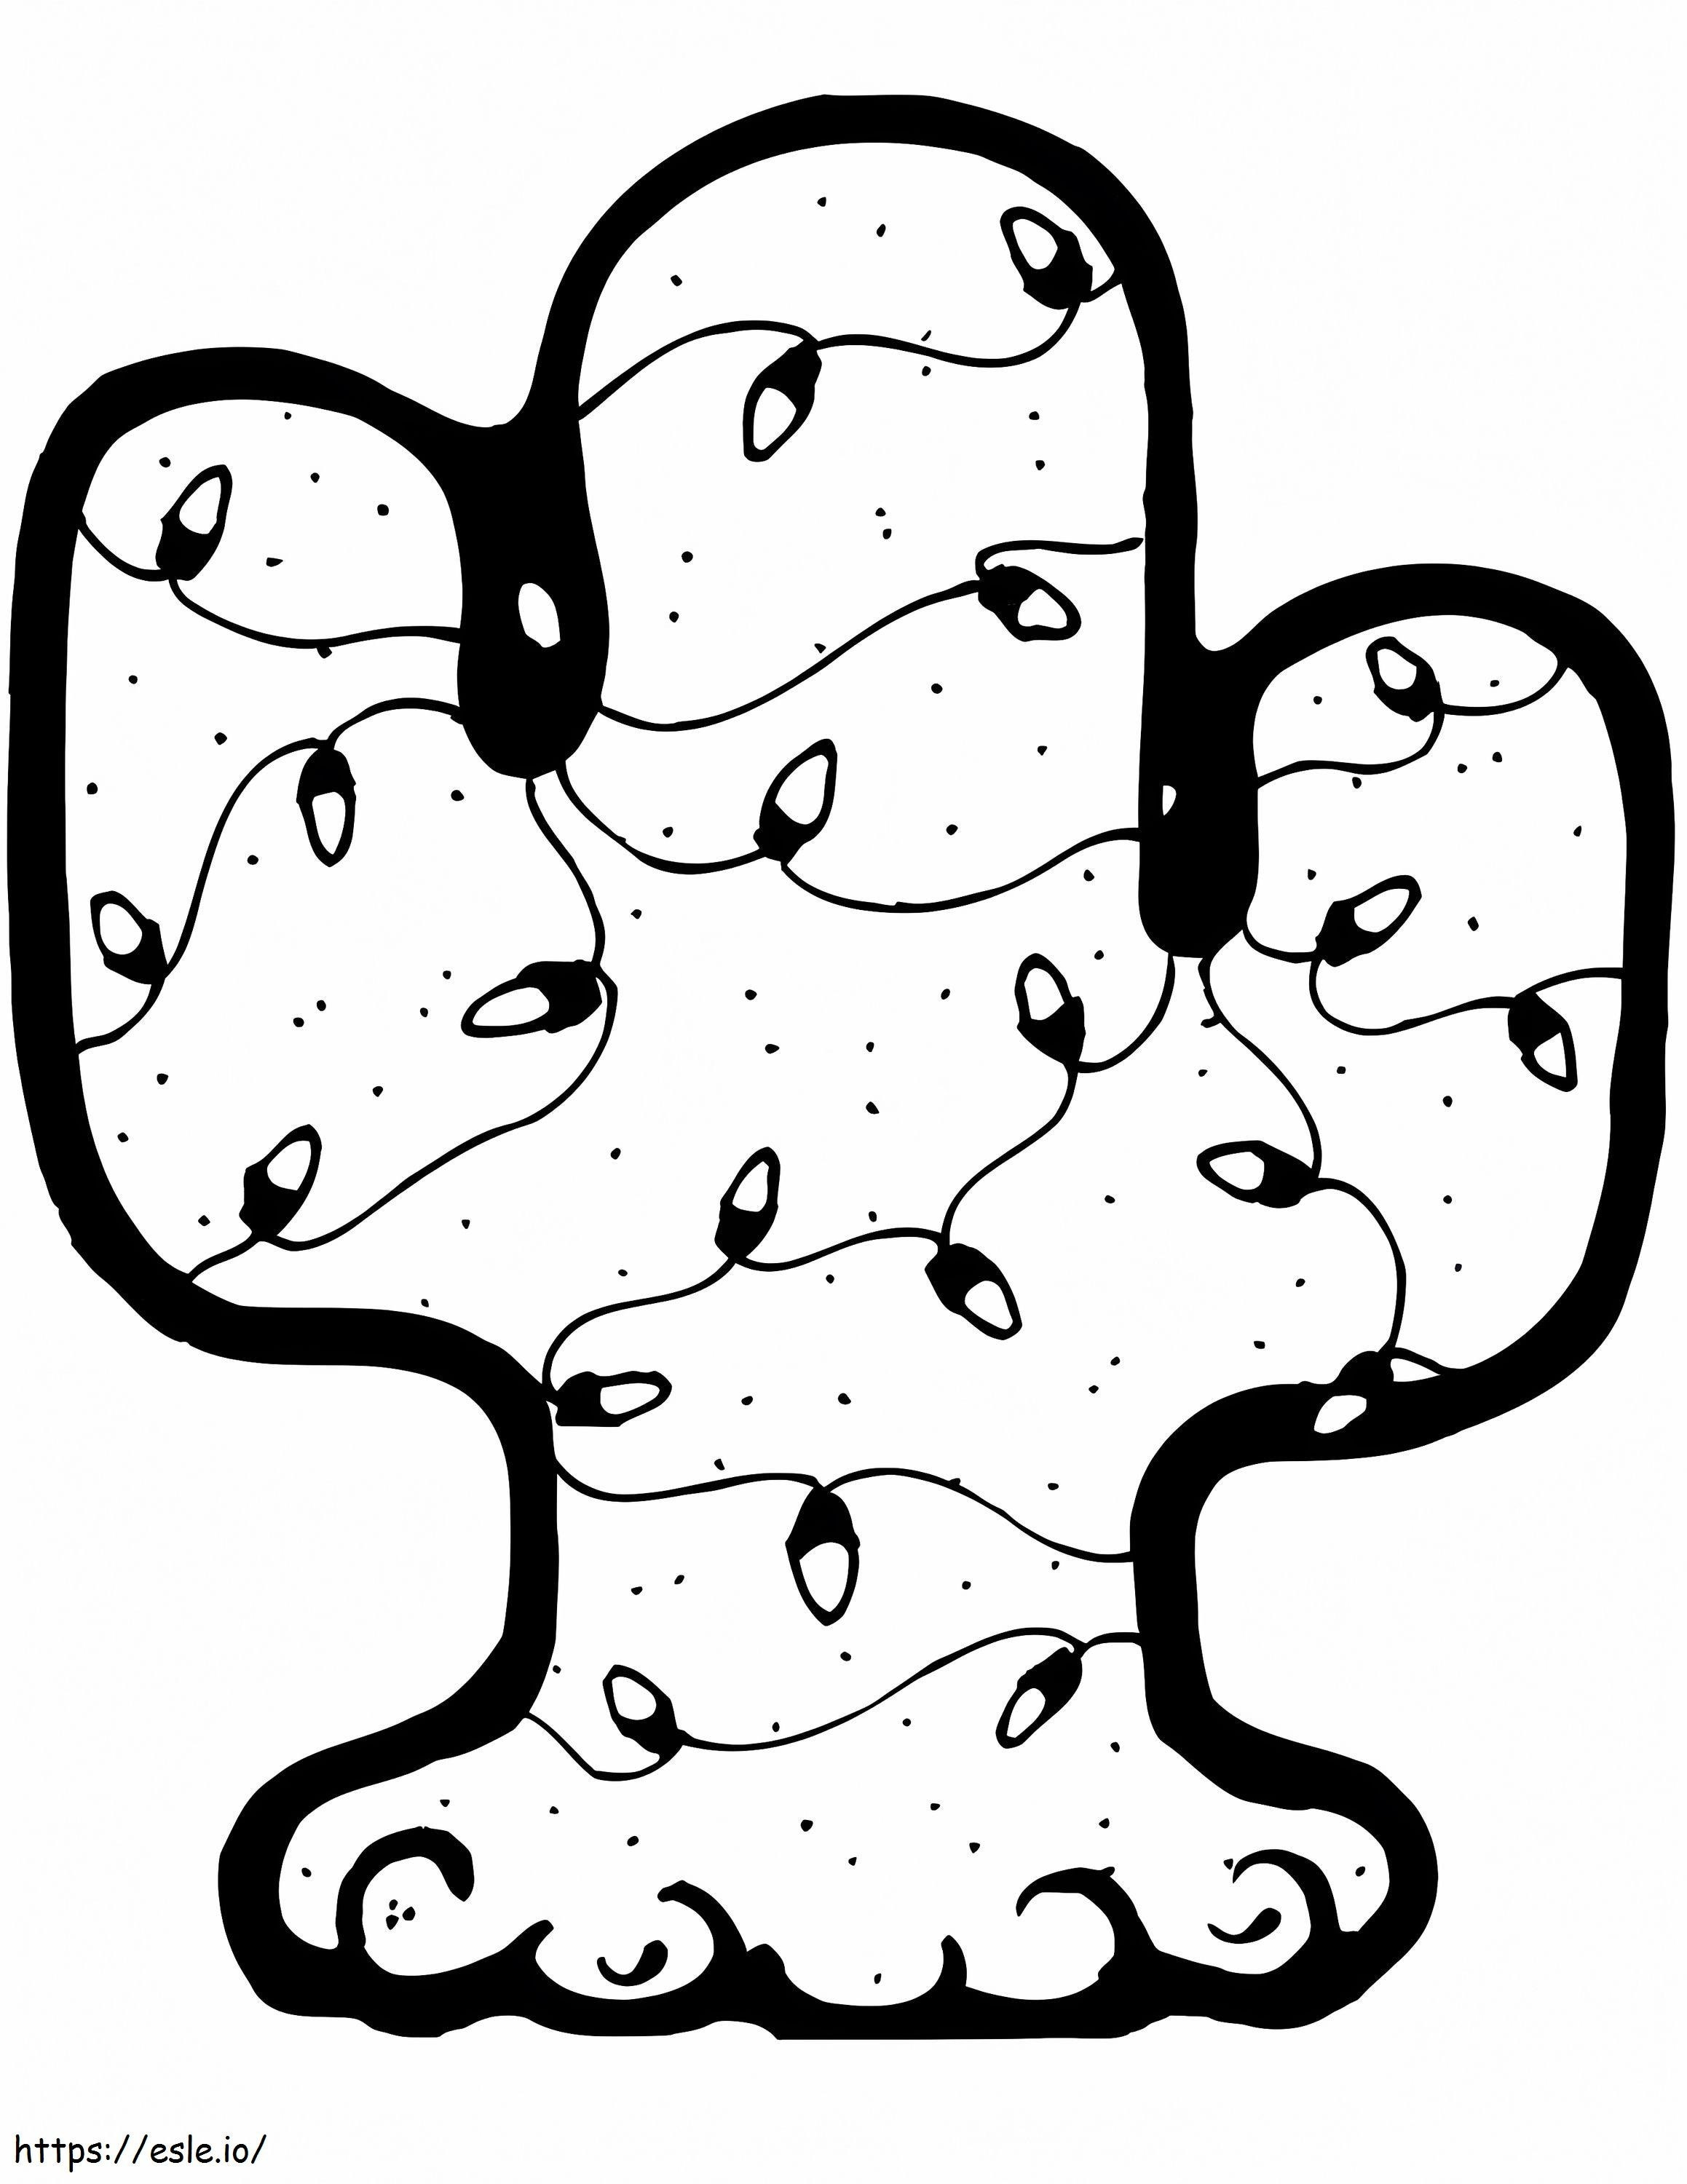 Cactus With Christmas Lights coloring page